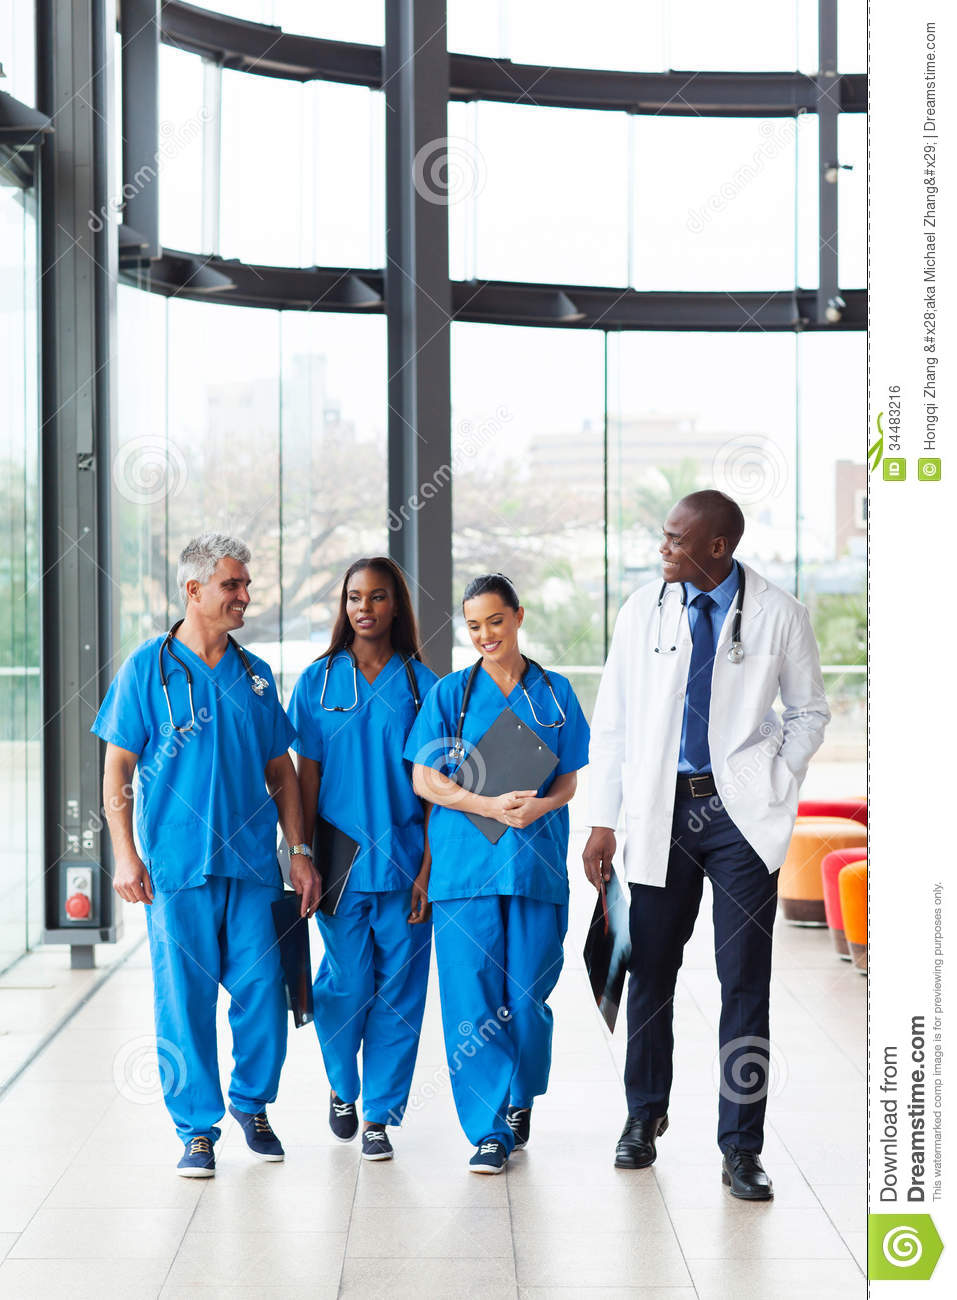 Health Care Workers Walking Royalty Free Stock Image   Image  34483216